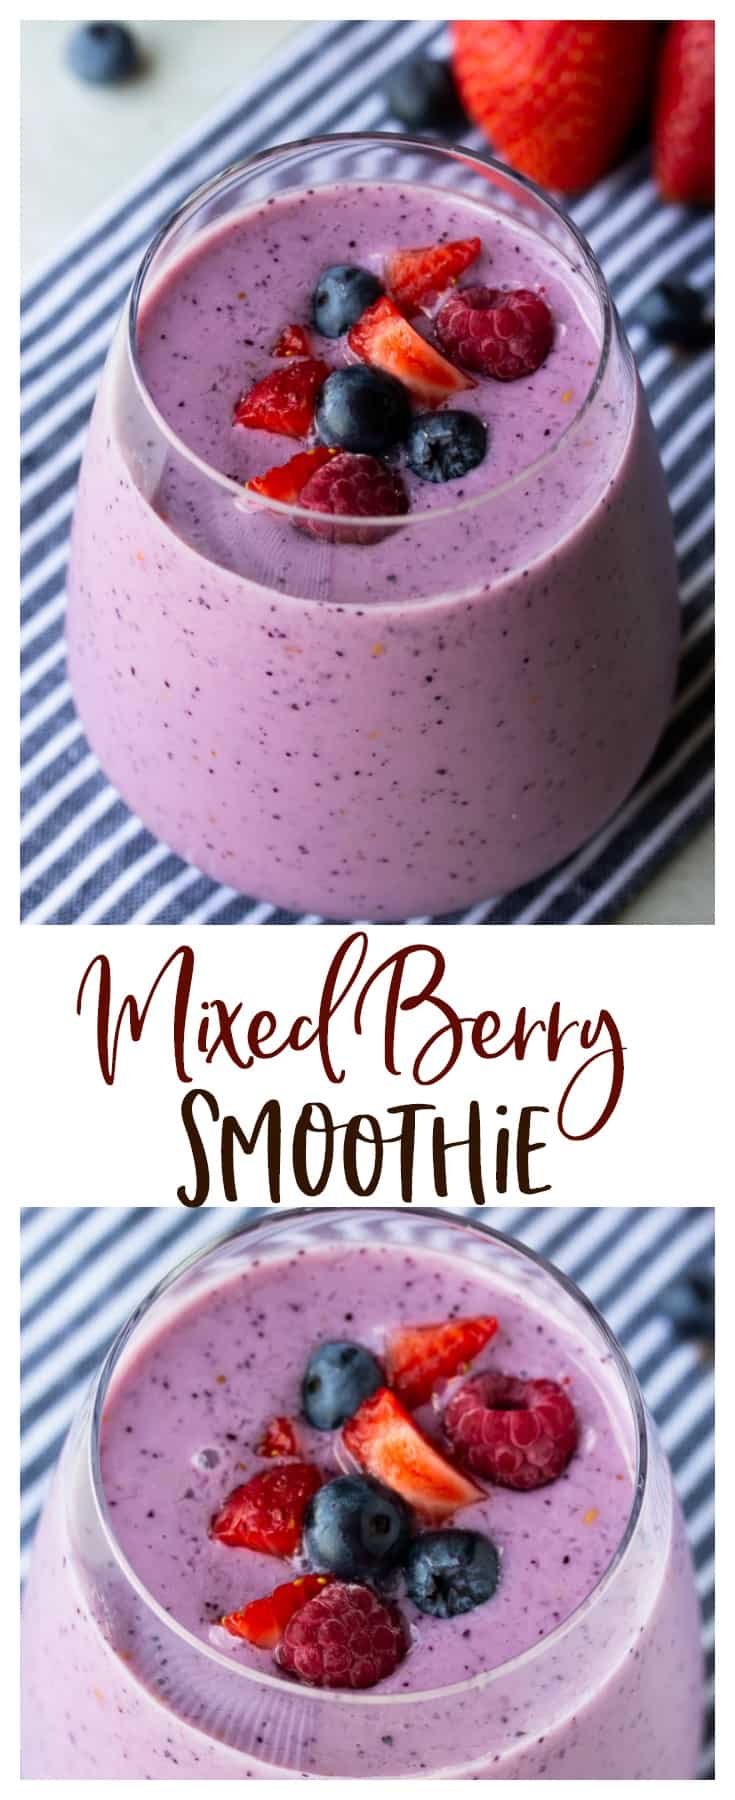 Mixed Berry Smoothie - Delicious Little Bites